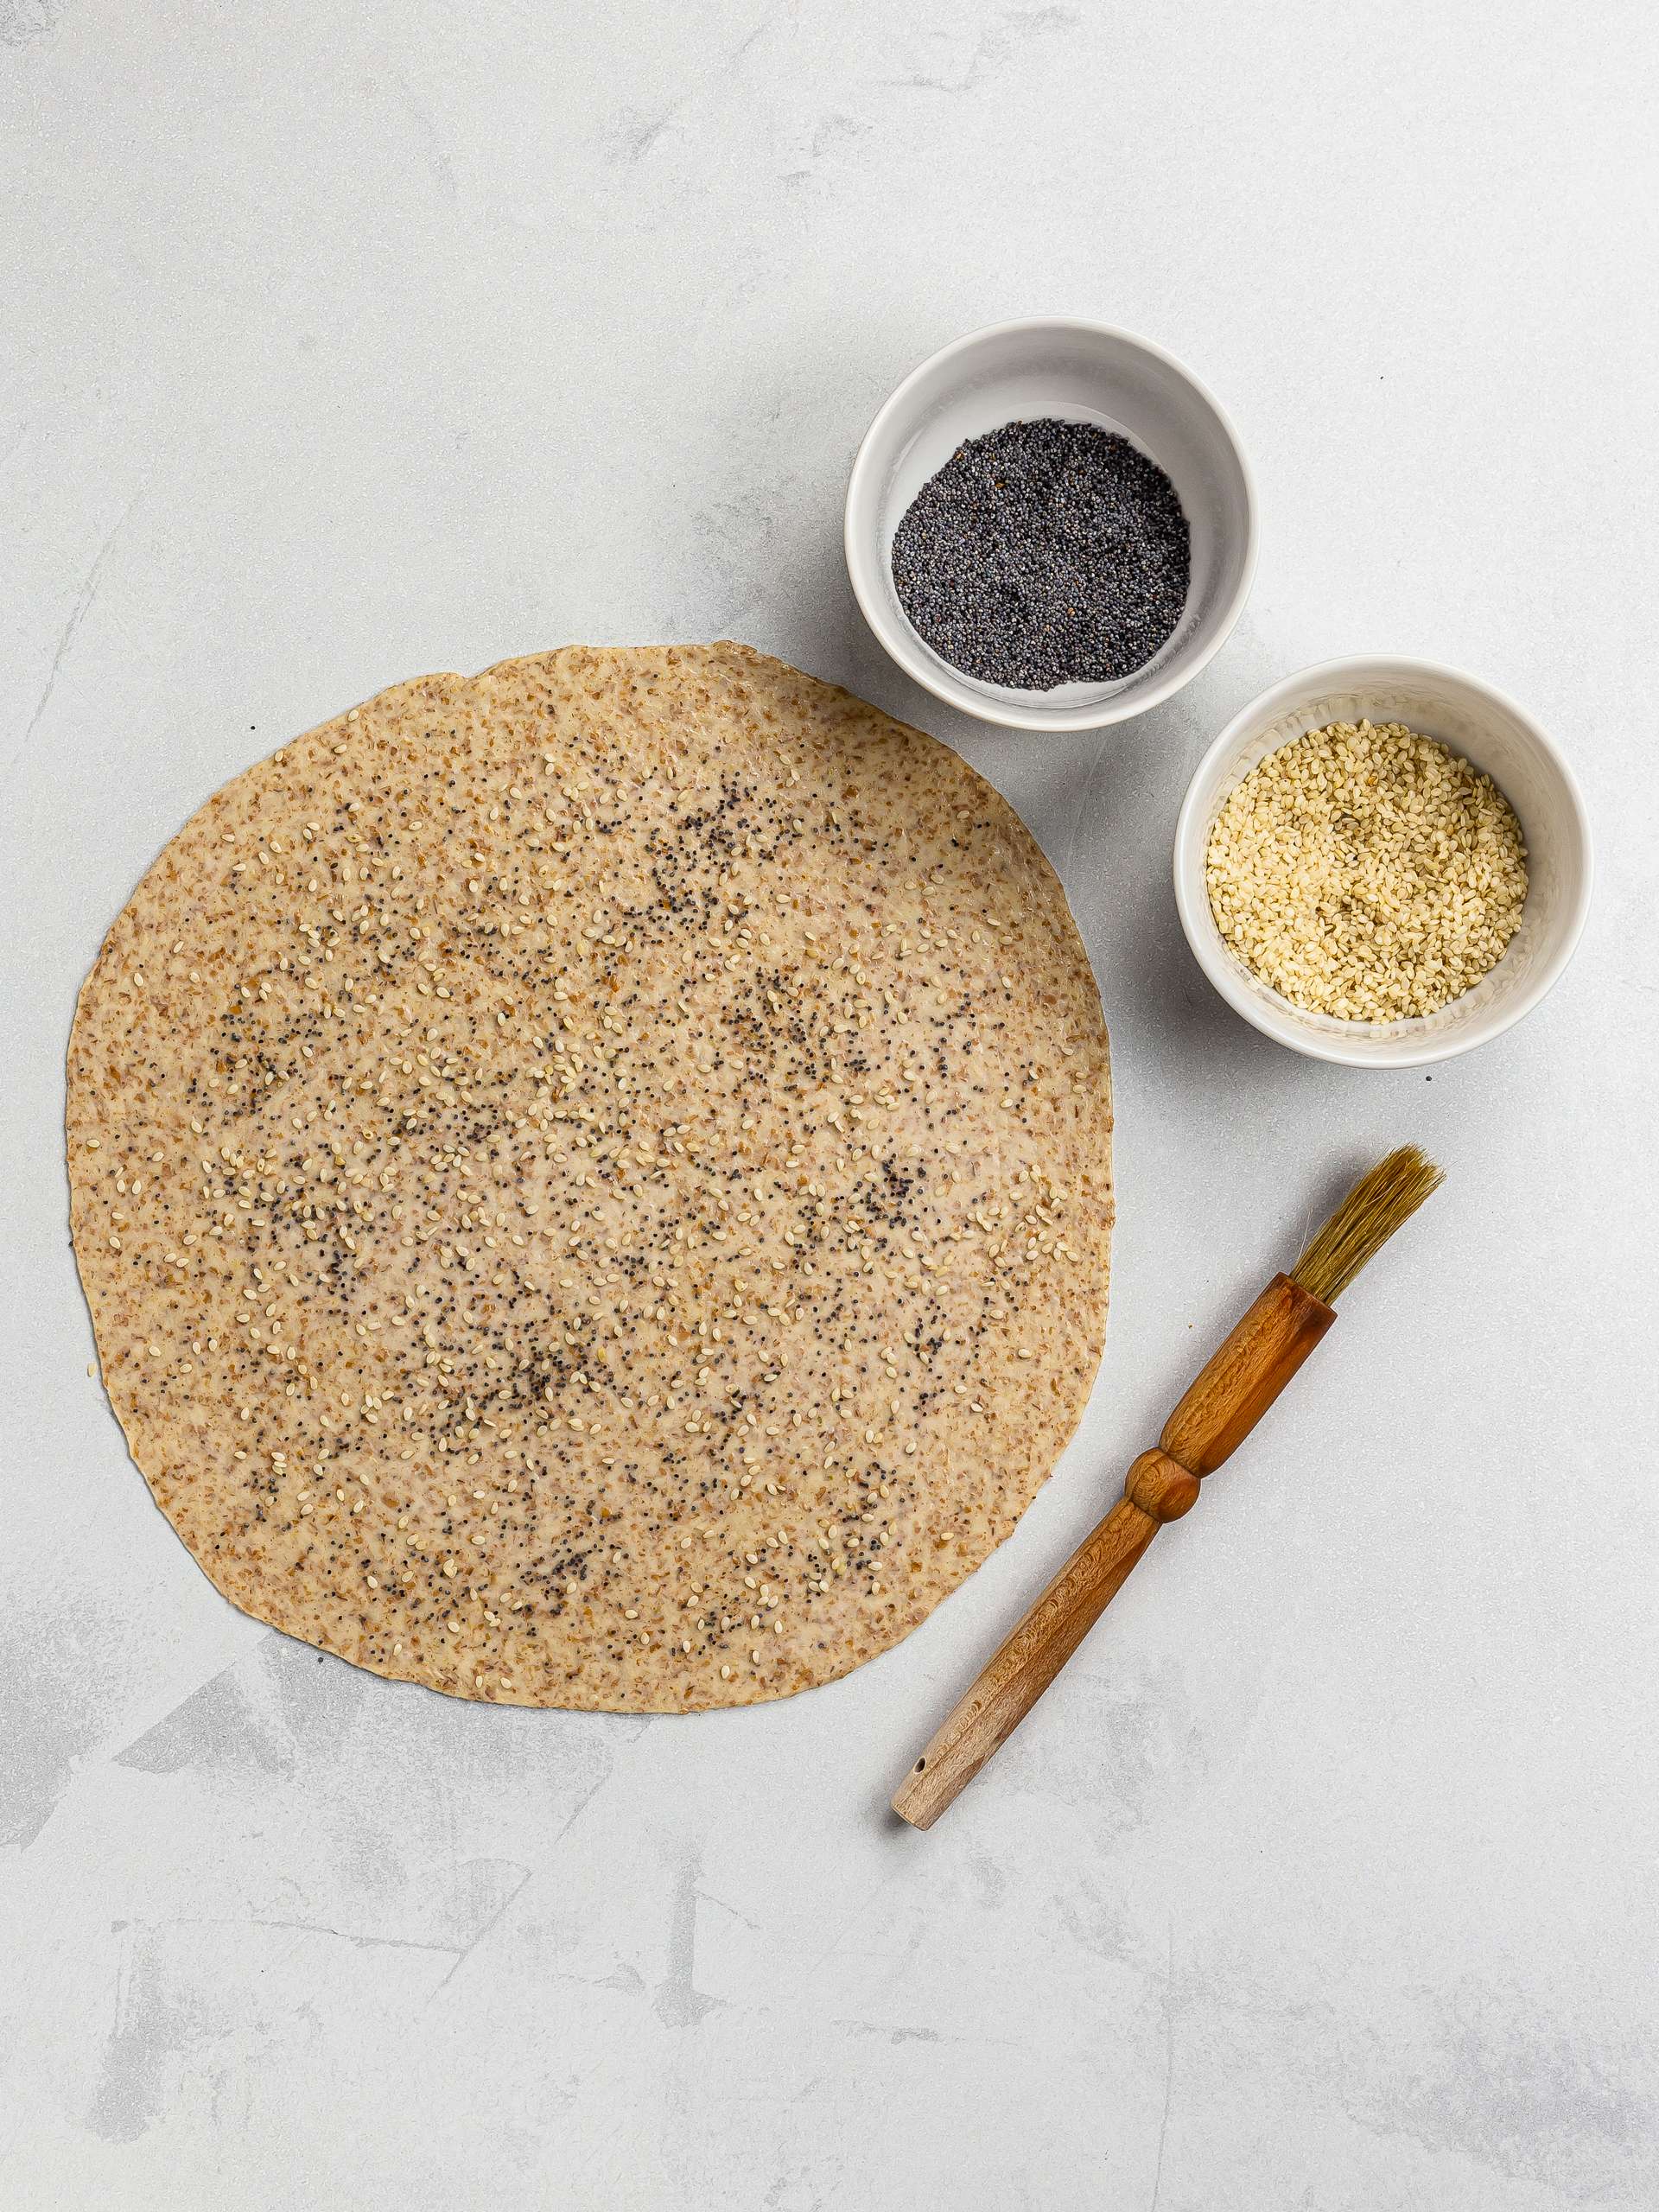 lavash flatbread with poppy and sesame seeds